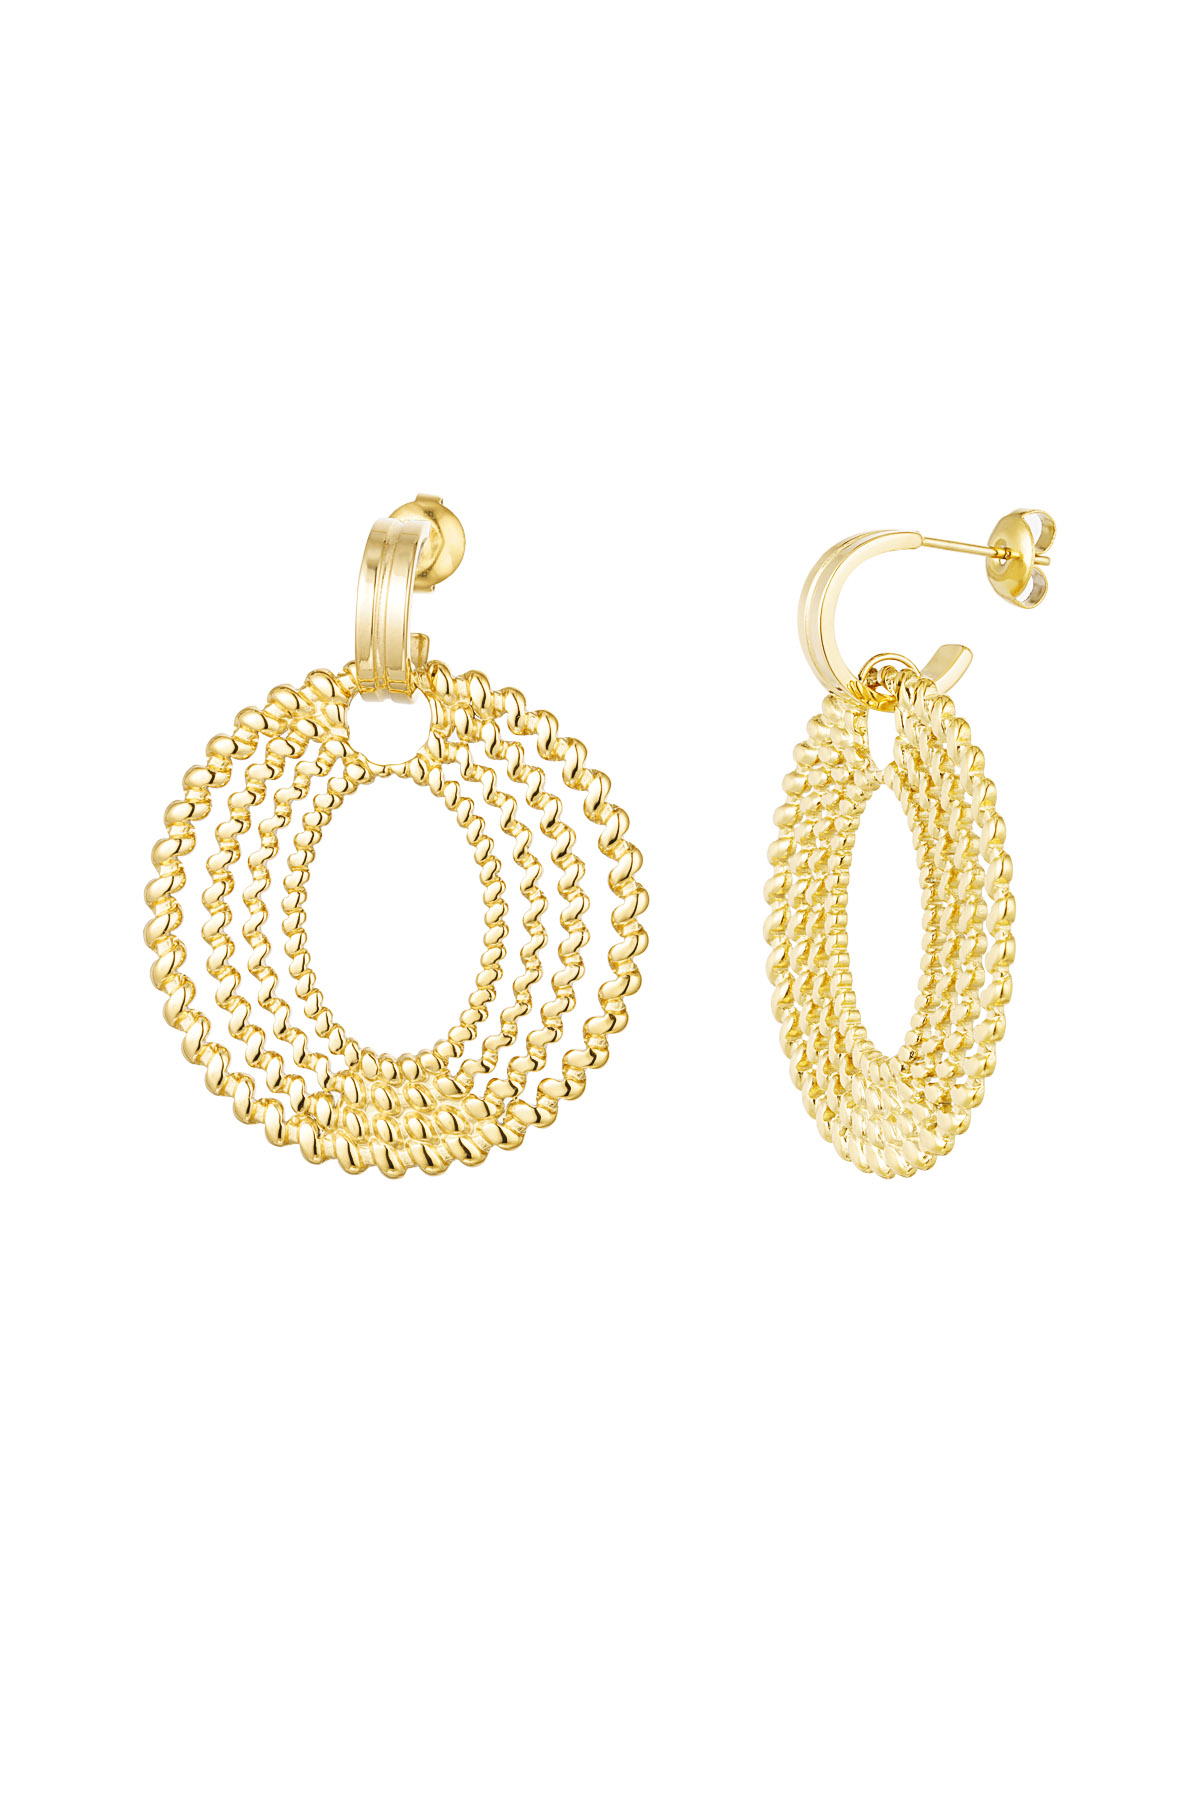 Curled earrings - gold h5 